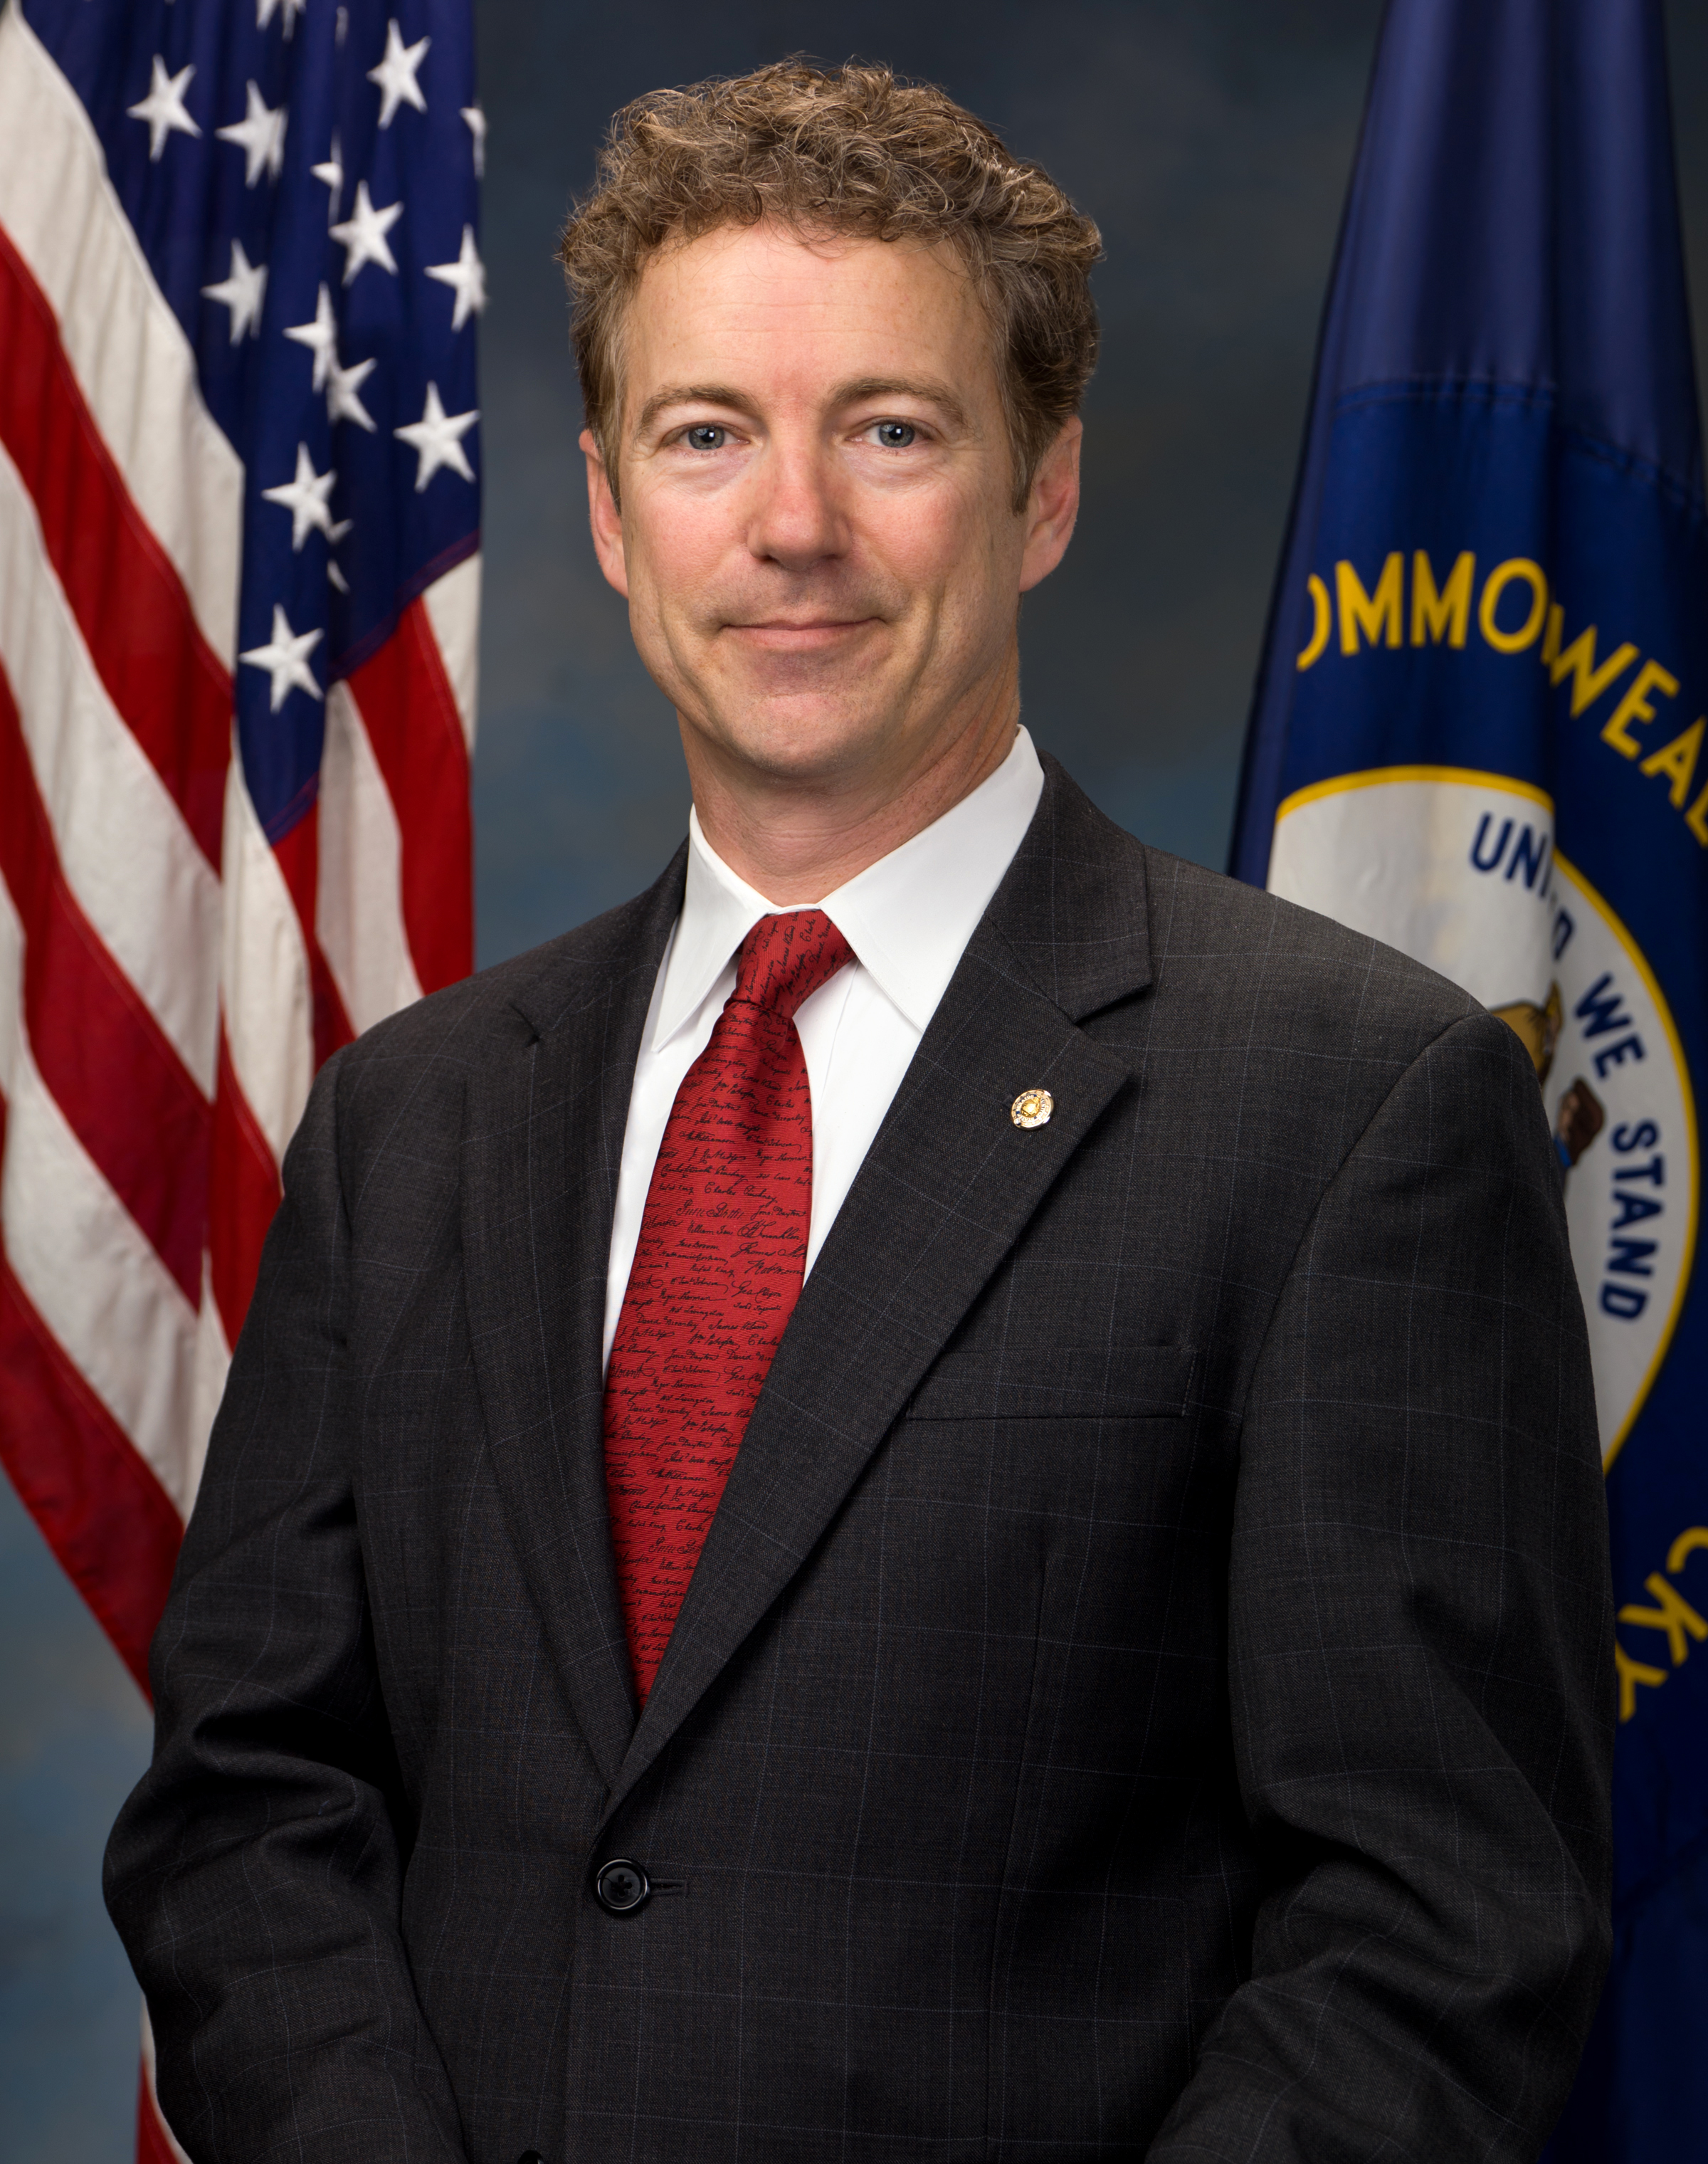 Did Rand Paul Drop Out of the Presidential Race? Revealed: The truth behind Rand Paul's campaign exit